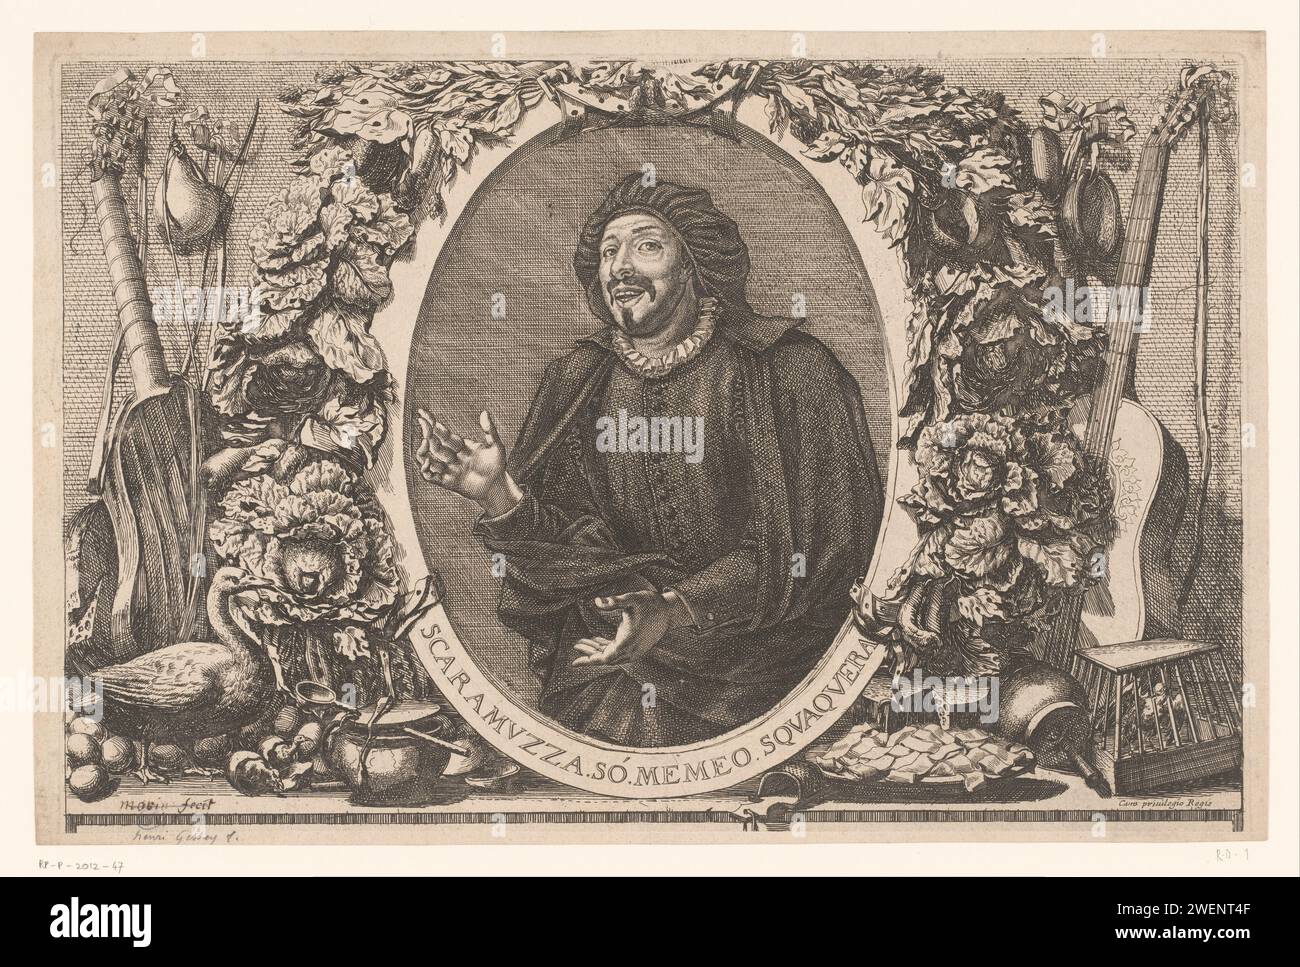 Portret Van Tiberio Fiorilli in De Rol Van Scaramuccia (Scaramouche), Jean Lepoutre (ACTRUTED TO), 1628 - 1682 print The actor is shown in half in an oval cartouche, which is covered with various types of cabbage. Next to the cartouche is a plate of pasta, a piece of cheese with a grater, a bird in a cage, a goose with youngsters who have just come out of the egg, next to a pot with lid and a spoon in between. Left and right is a guitar.  paper etching / engraving historical persons. portrait of actor, actress. ornament  cartouche. types in 'commedia dell'arte' (with NAME). plants and herbs: Stock Photo